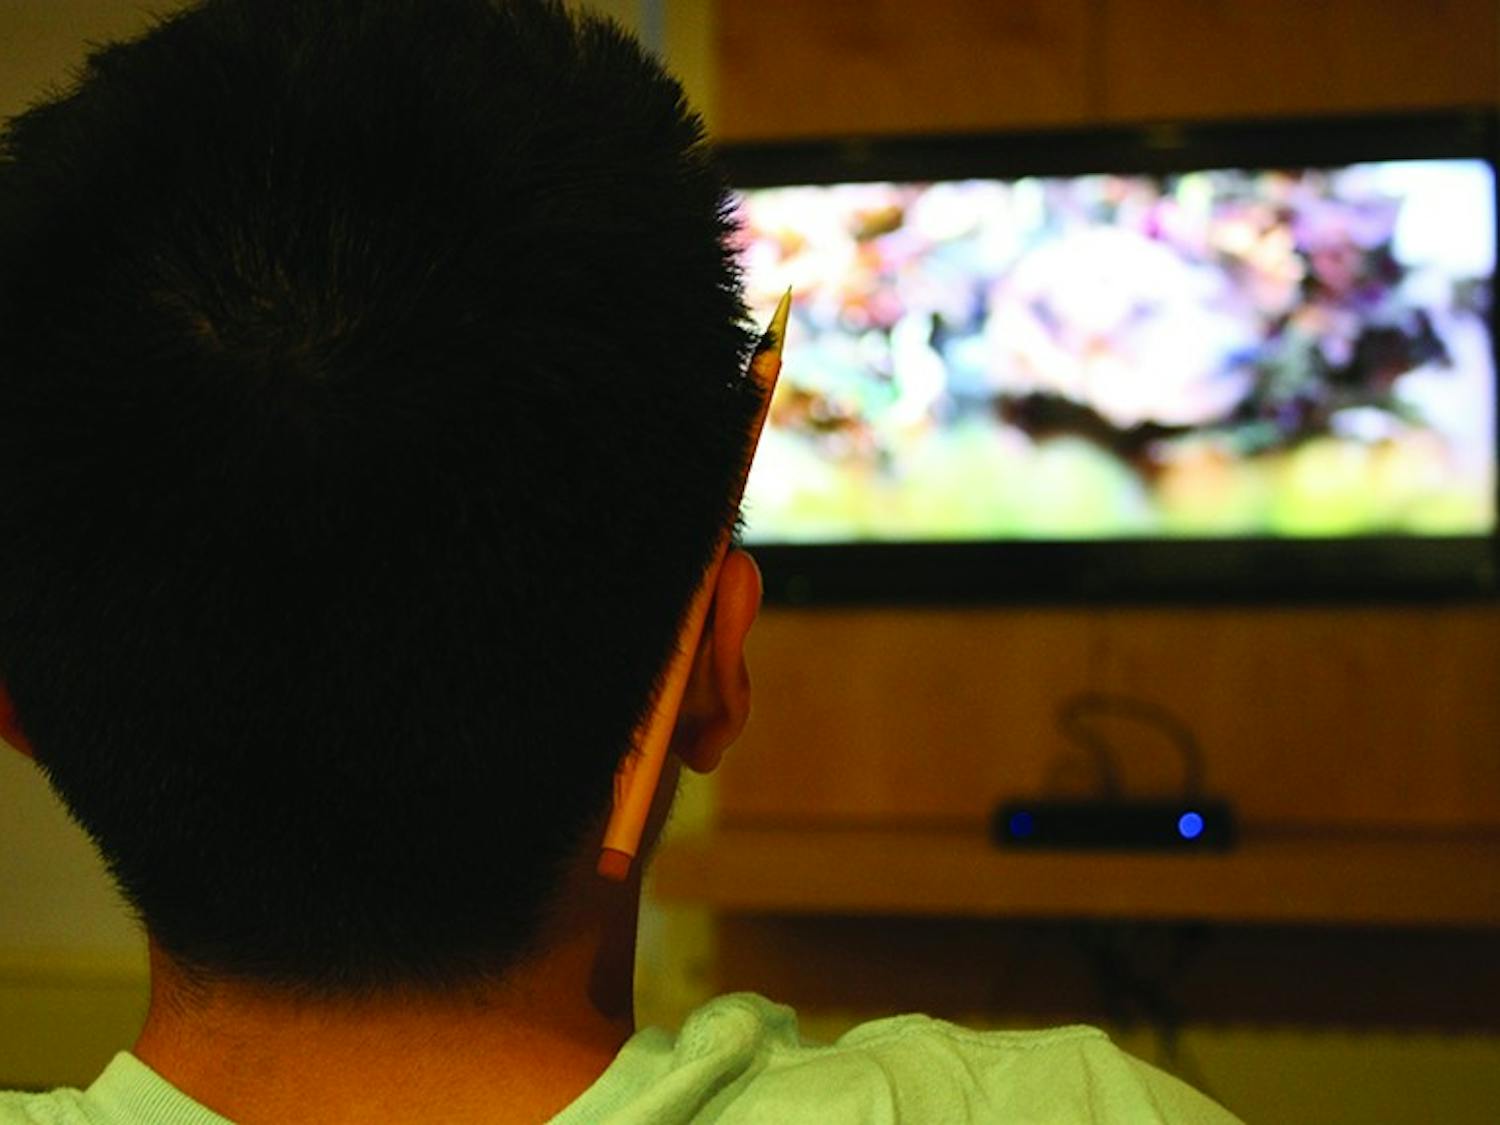 A student takes in a television show at the Collis Center.